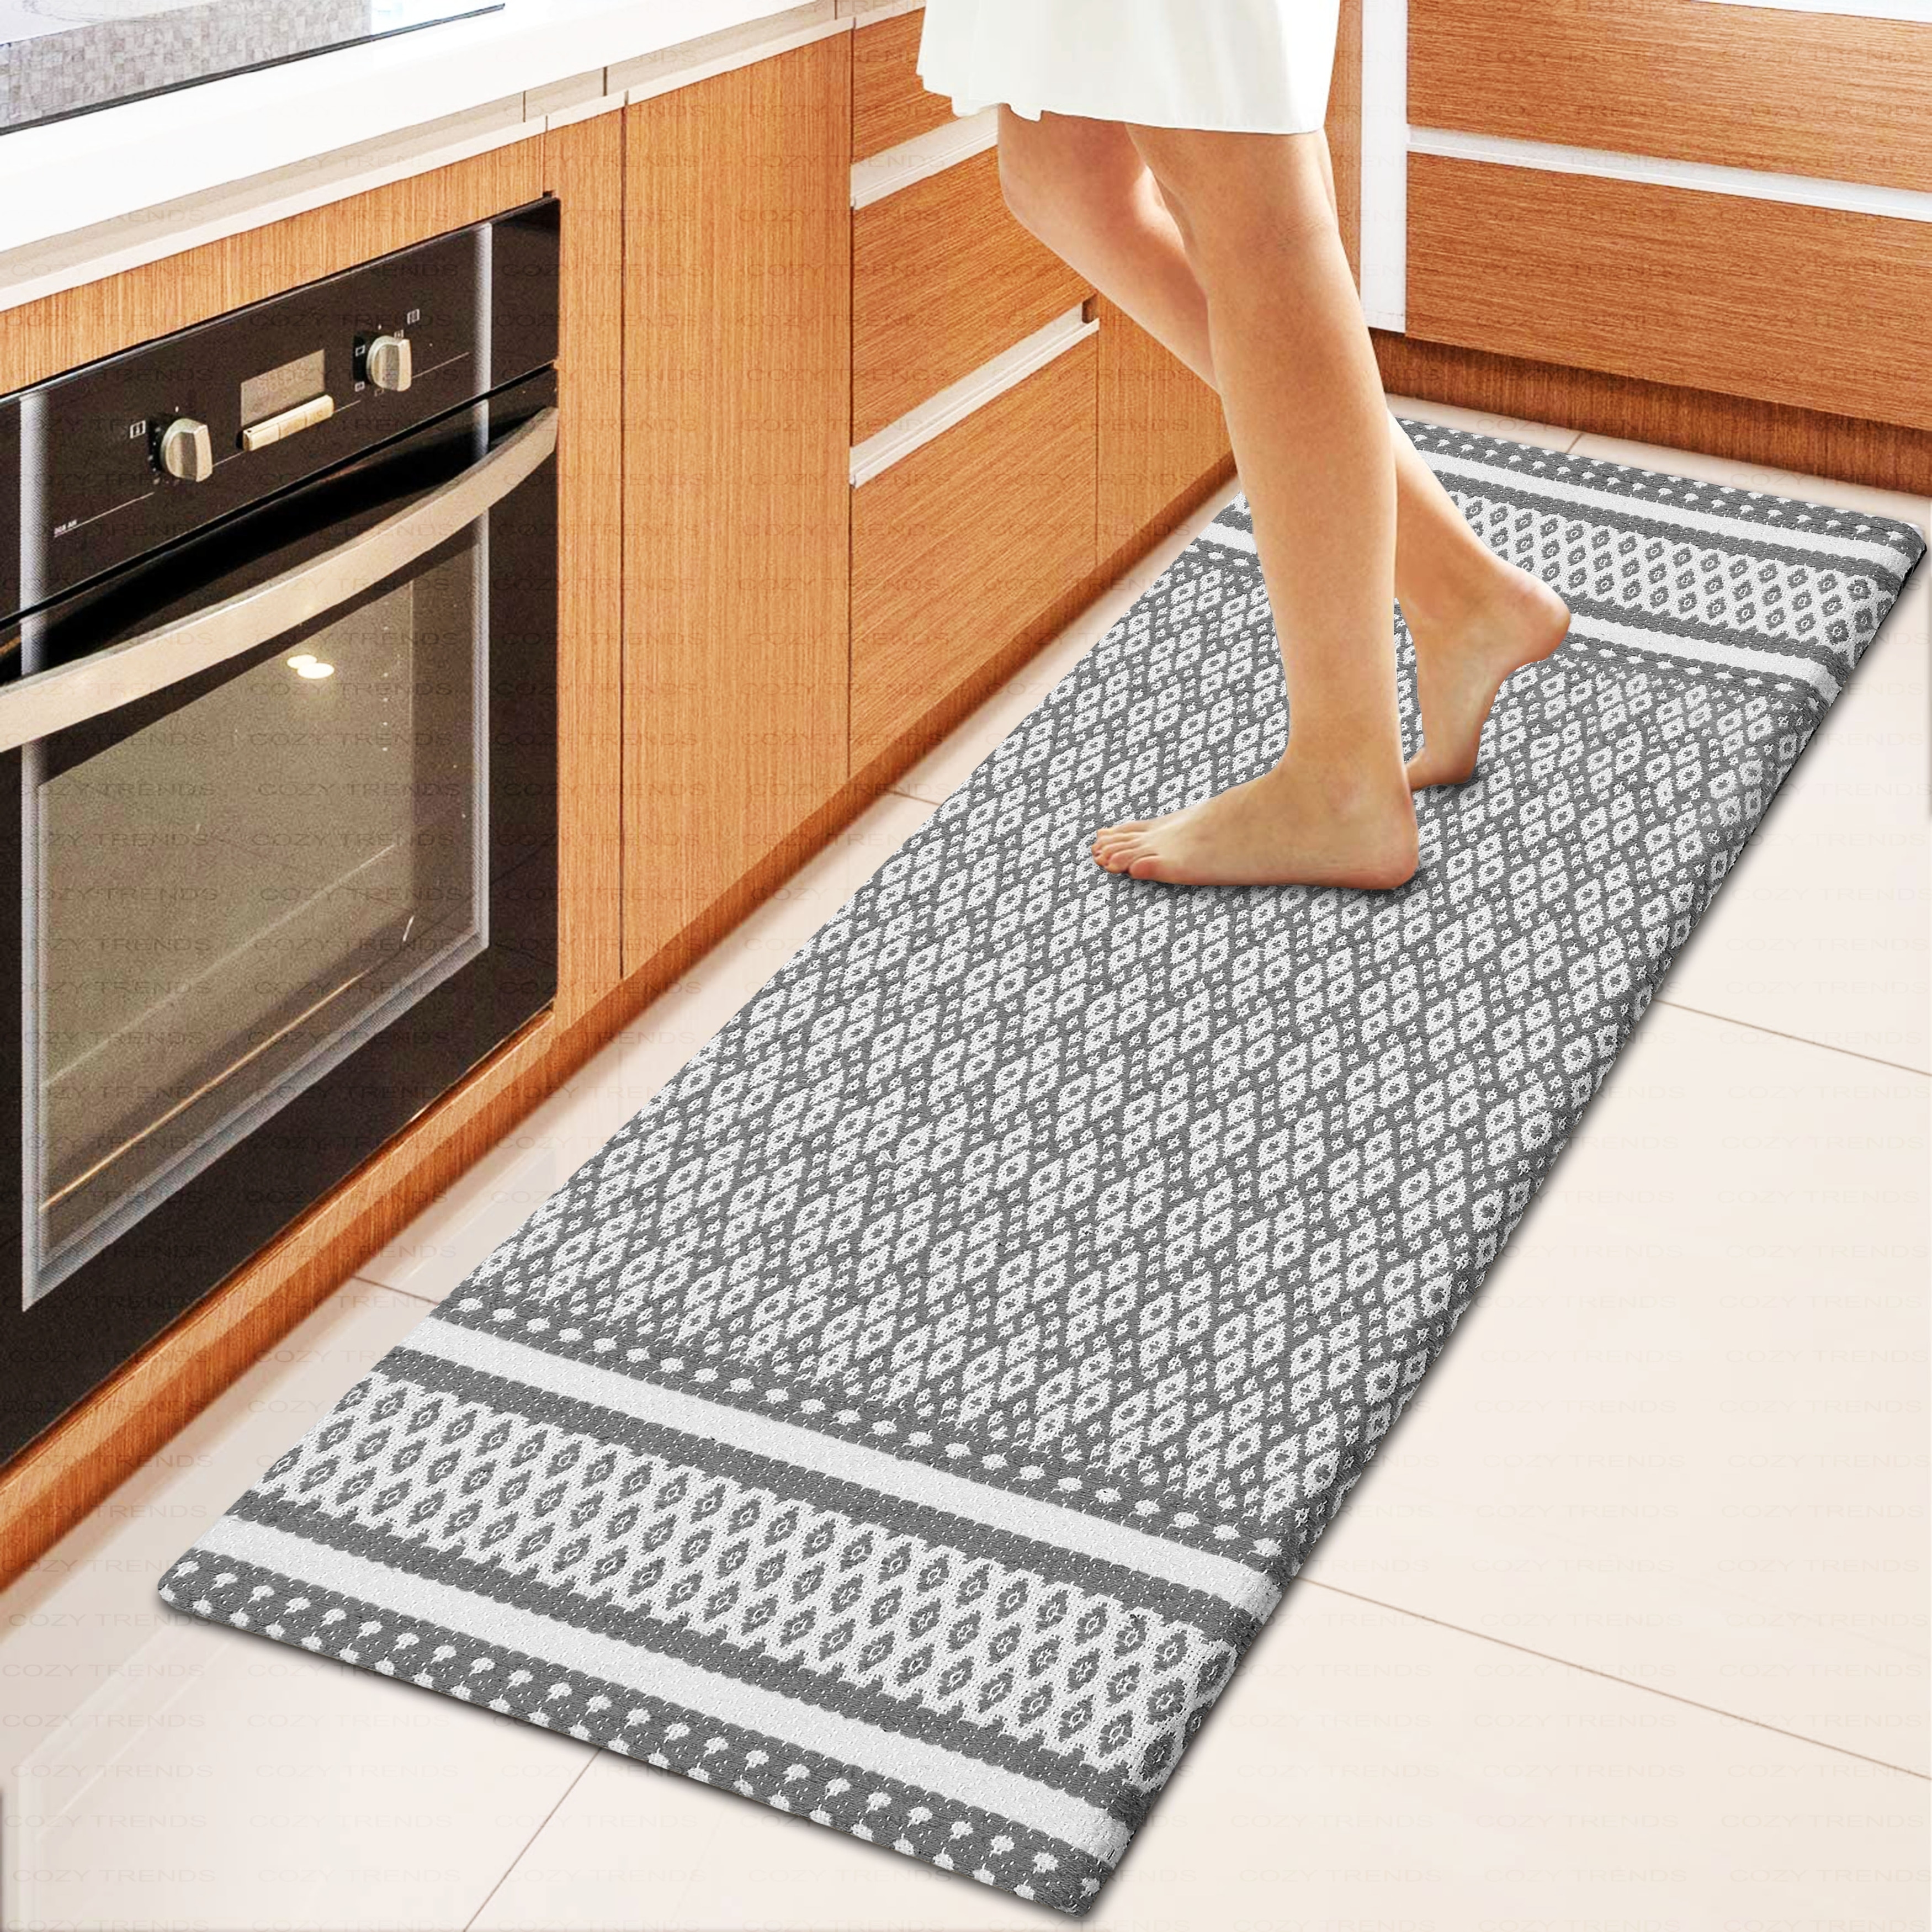 https://ak1.ostkcdn.com/images/products/is/images/direct/9f65a21630cbbd33530b0a074ce71a6ce1122997/Woven-Cotton-Anti-Fatigue-Anti-Skid-Cushioned-Kitchen--Doormat-Bathroom-Mats-%26-Runners.jpg